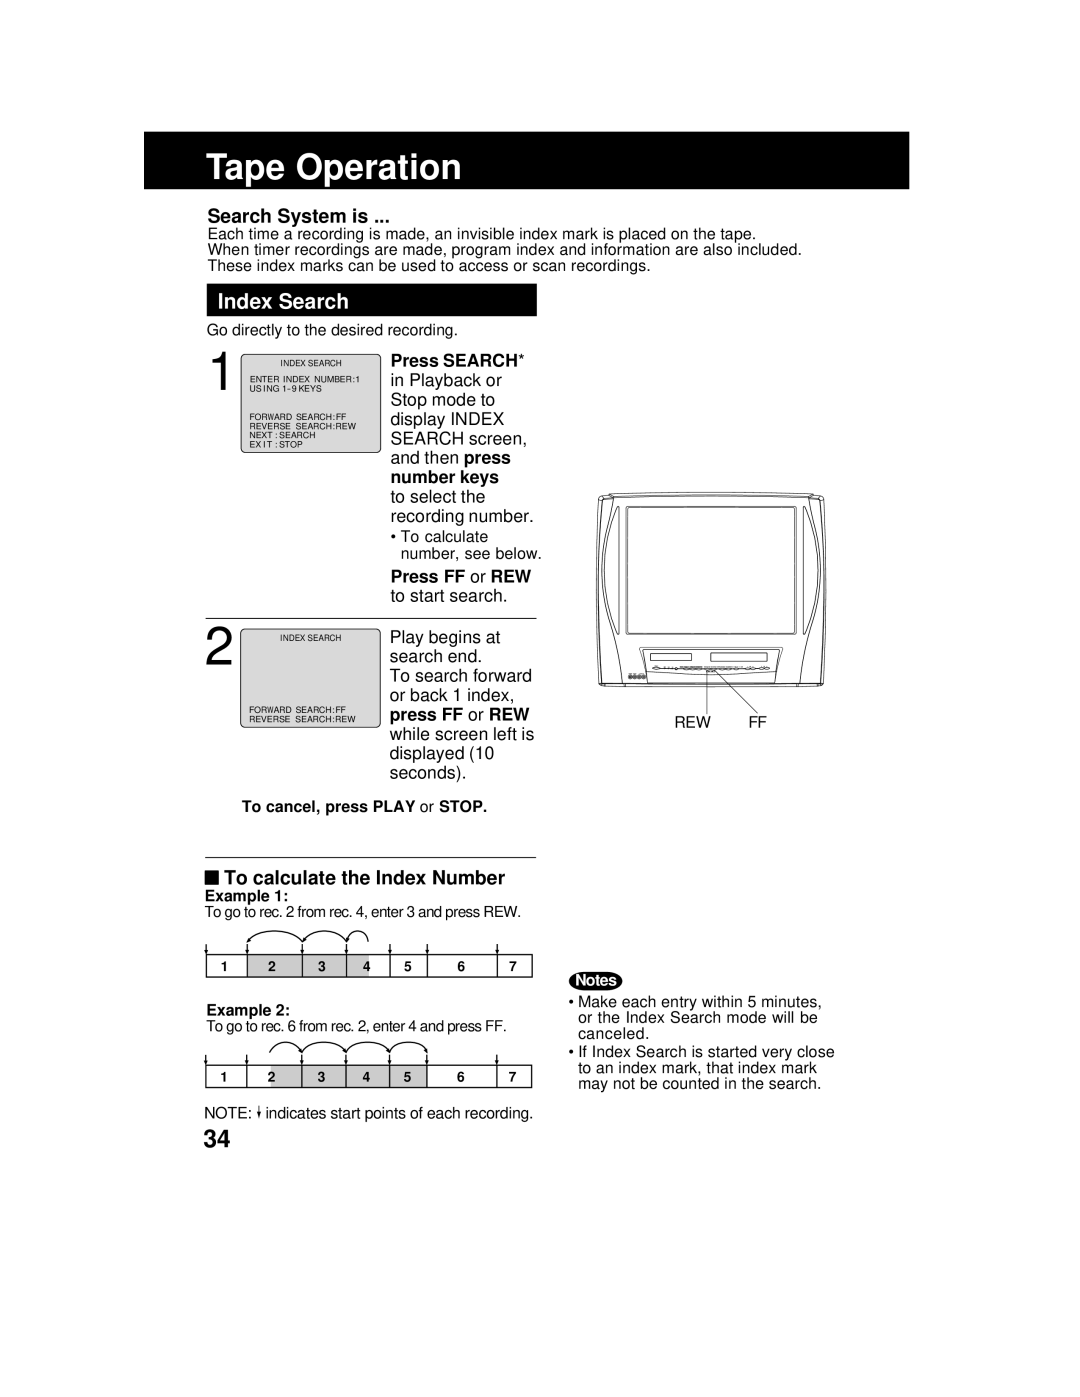 Panasonic AG 527DVDE manual Tape Operation, Index Search, Search System is, To calculate the Index Number, Play begins at 